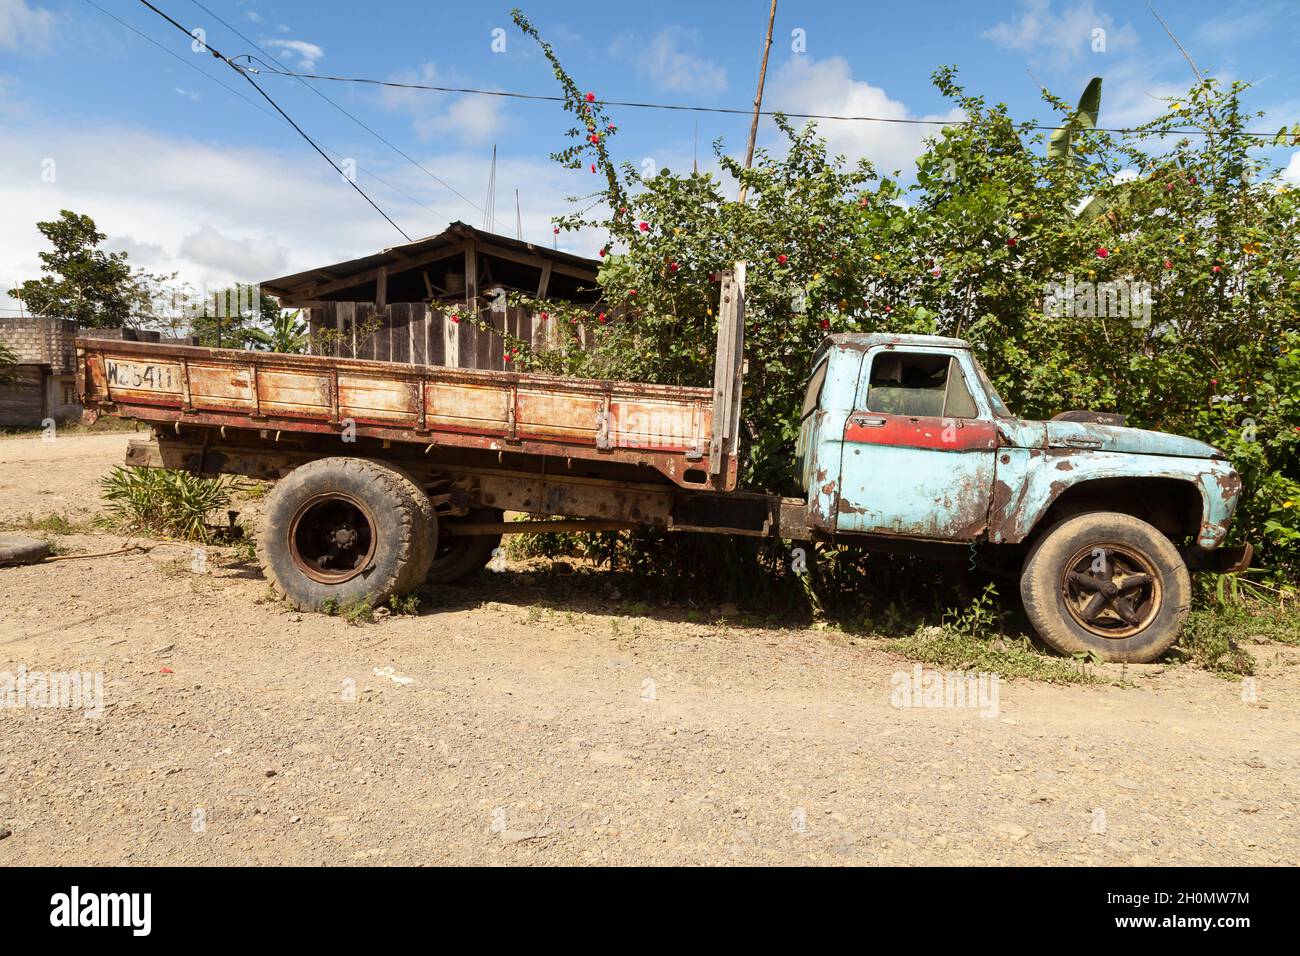 Pilcopata, Peru - April 12, 2014: An old, rusty and abandoned Ford truck, painted blue, rests in the surroundings of the small town of Pilcopata Stock Photo